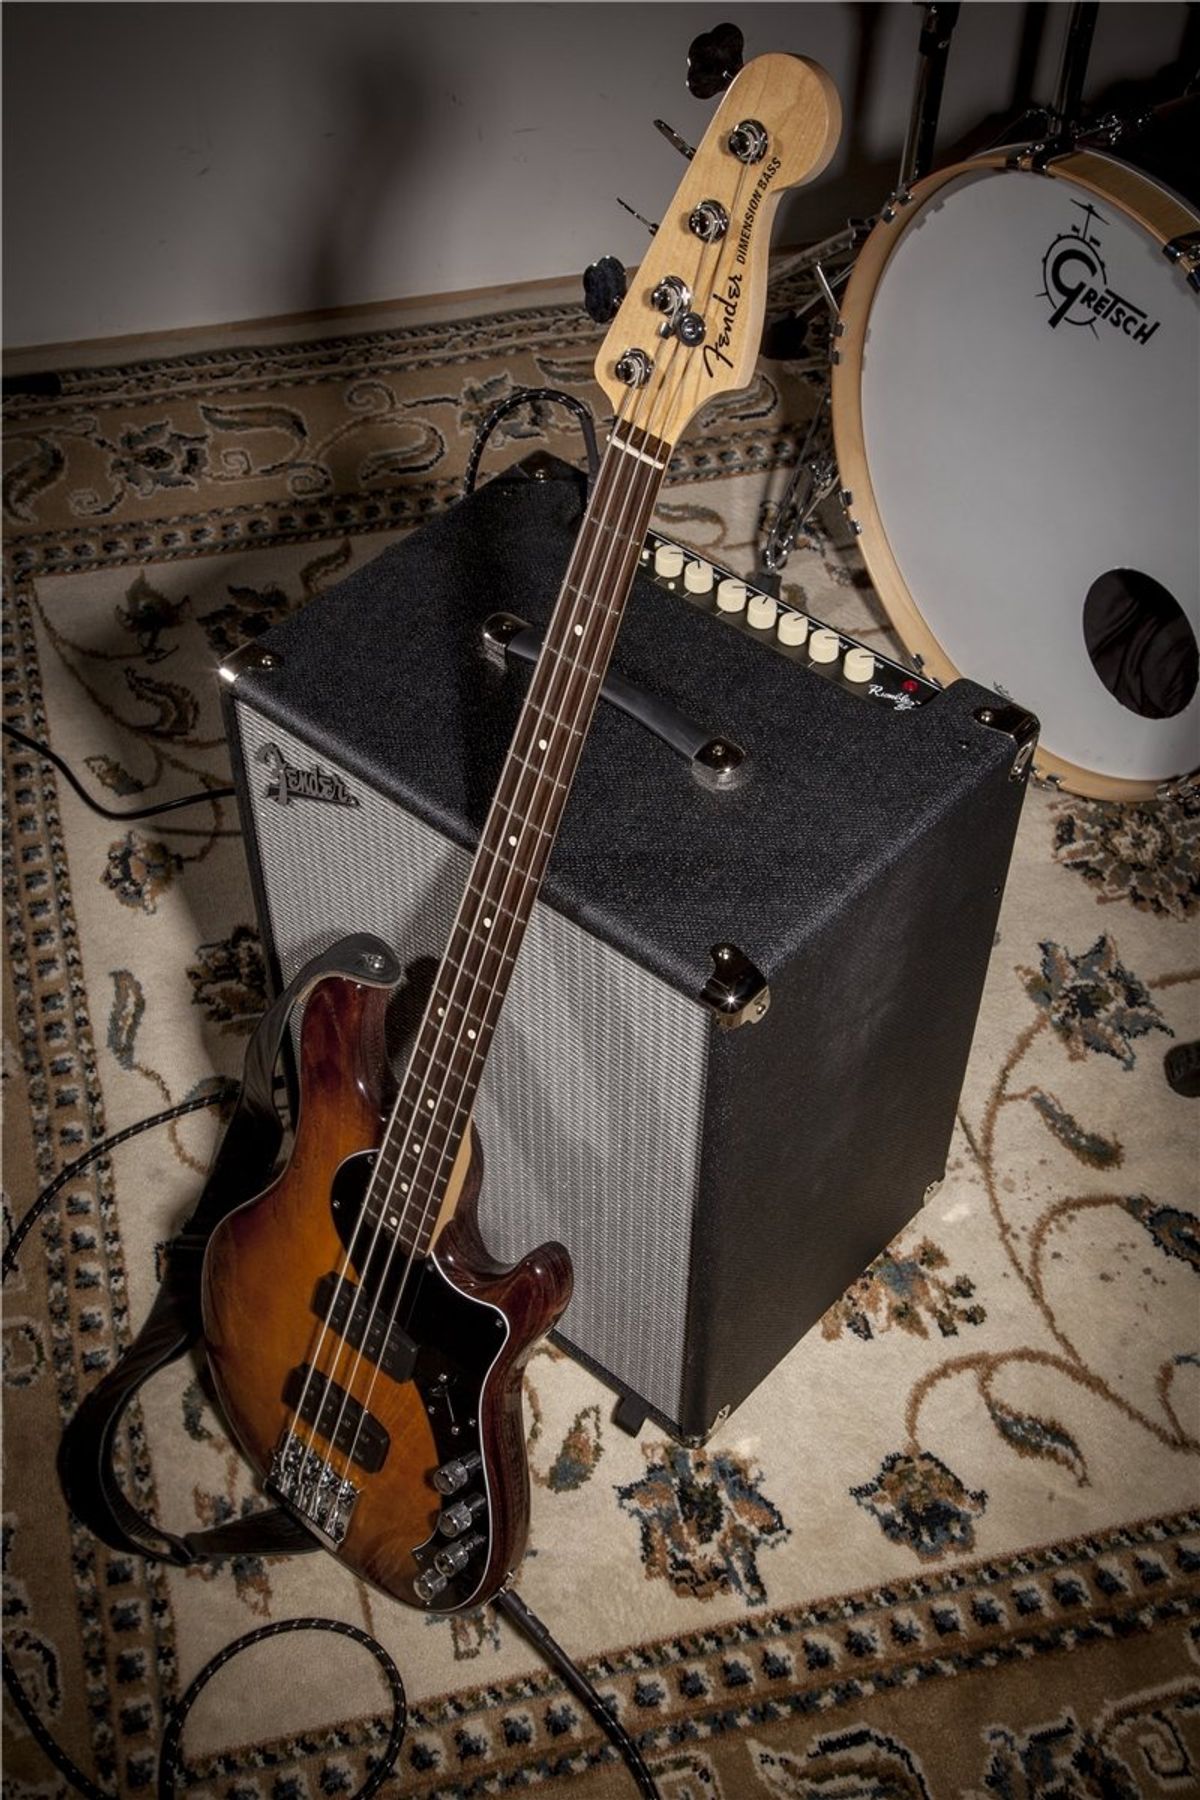 Bass Combos for Under $700